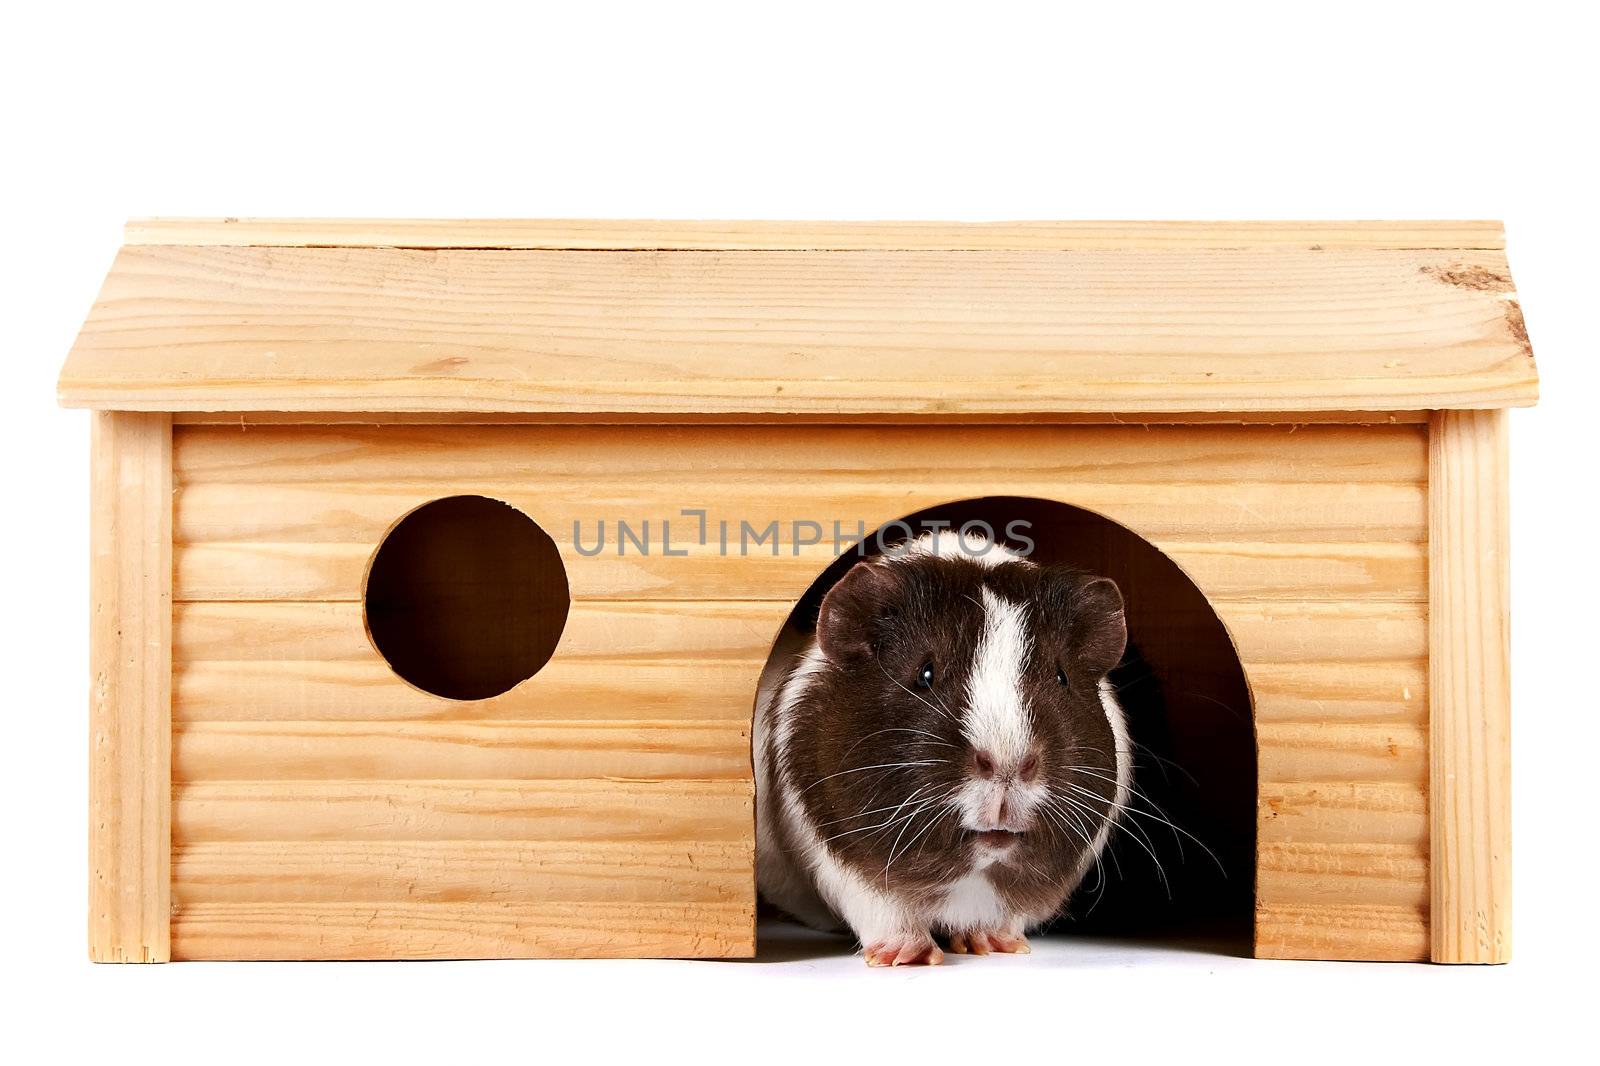 Guinea pigs in a wooden small house by Azaliya